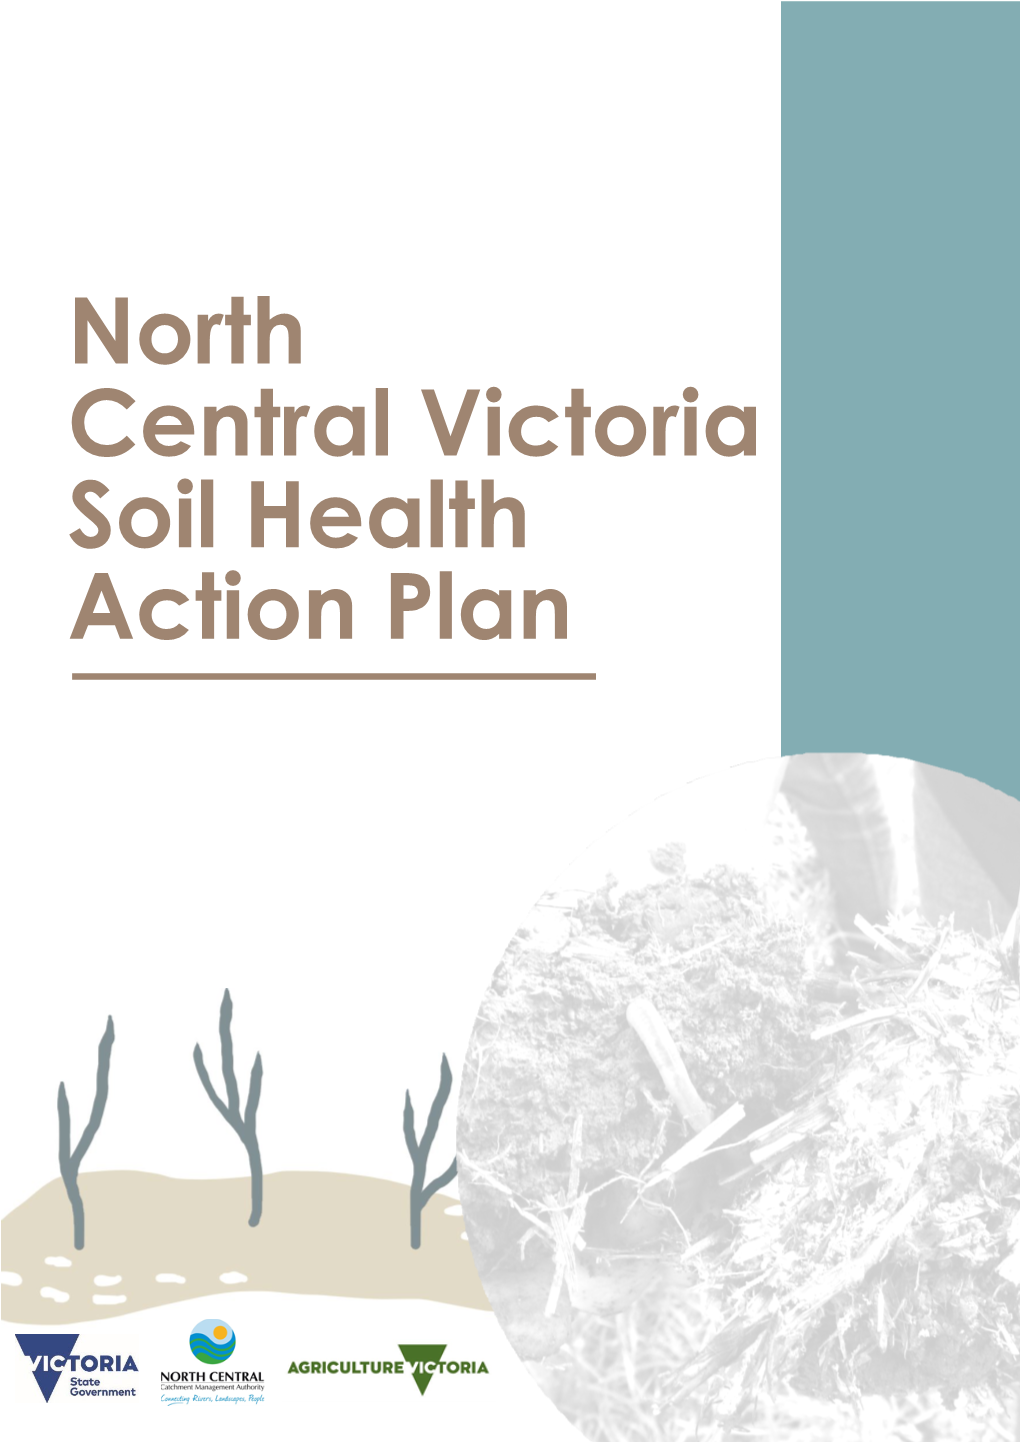 North Central Victoria Soil Health Action Plan